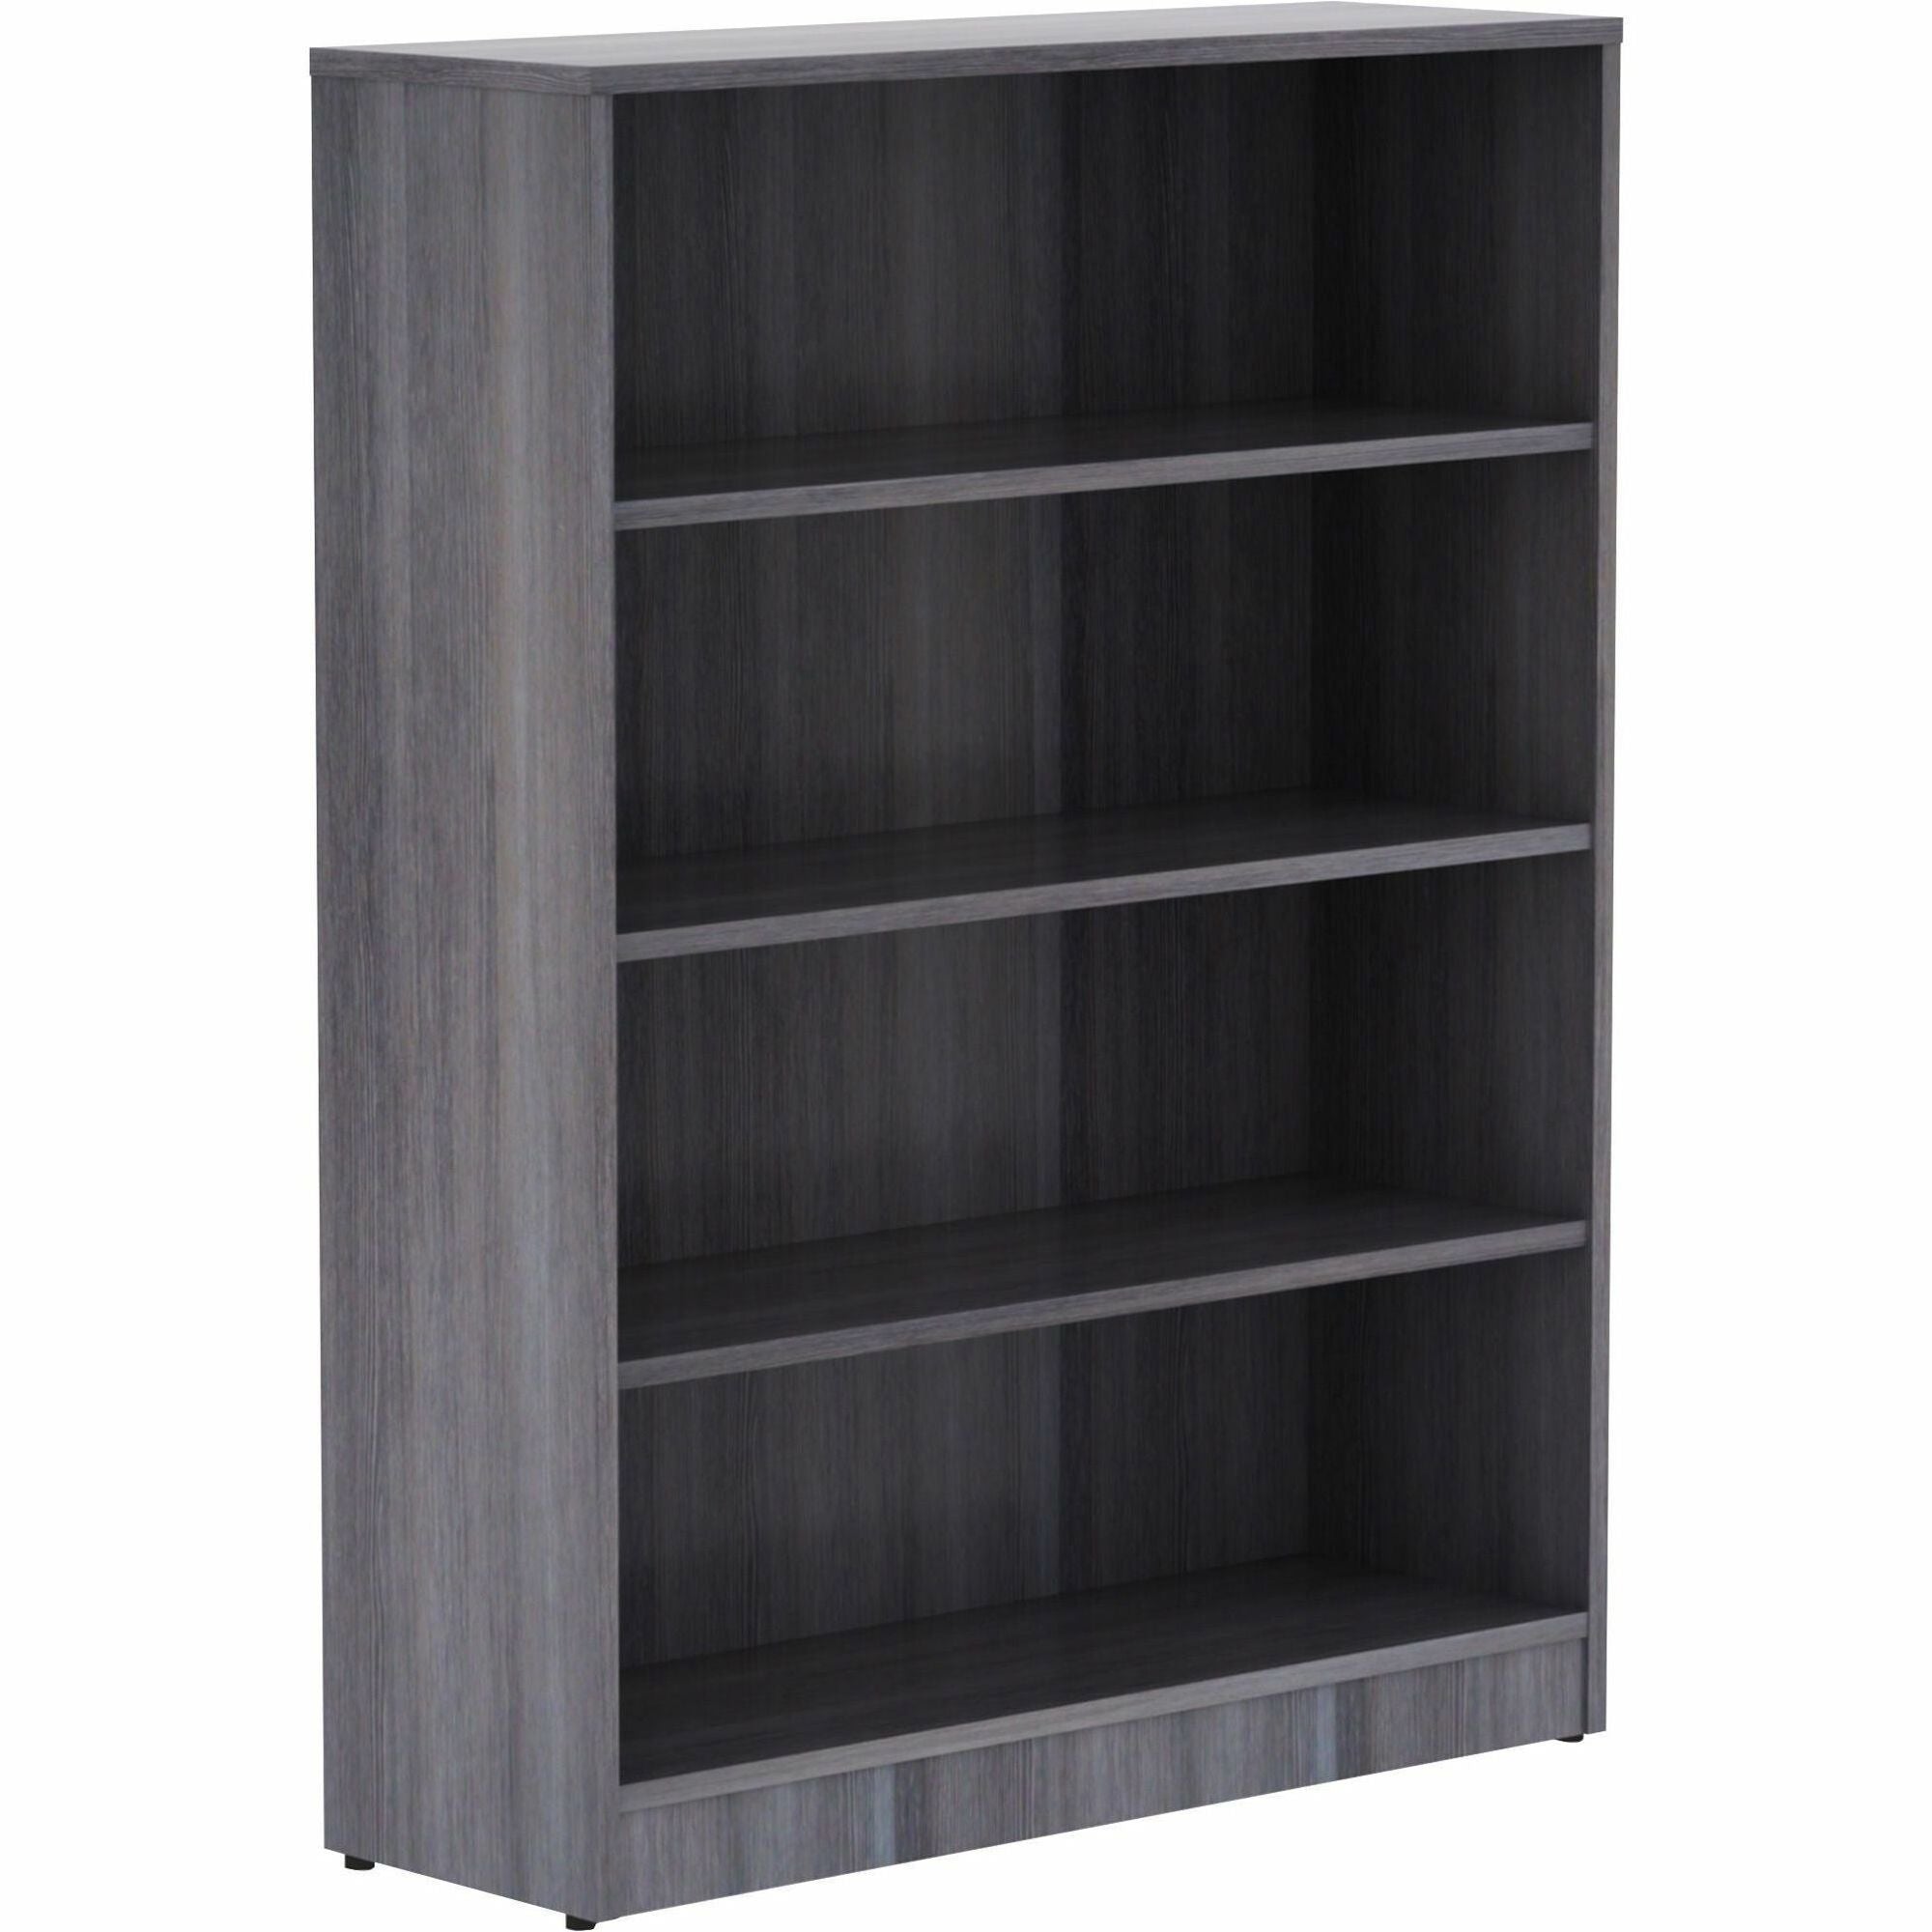 Lorell Laminate Bookcase - 4 Shelf(ves) - 48" Height x 36" Width x 12" Depth - Thermally Fused Laminate - 1 Each - 1